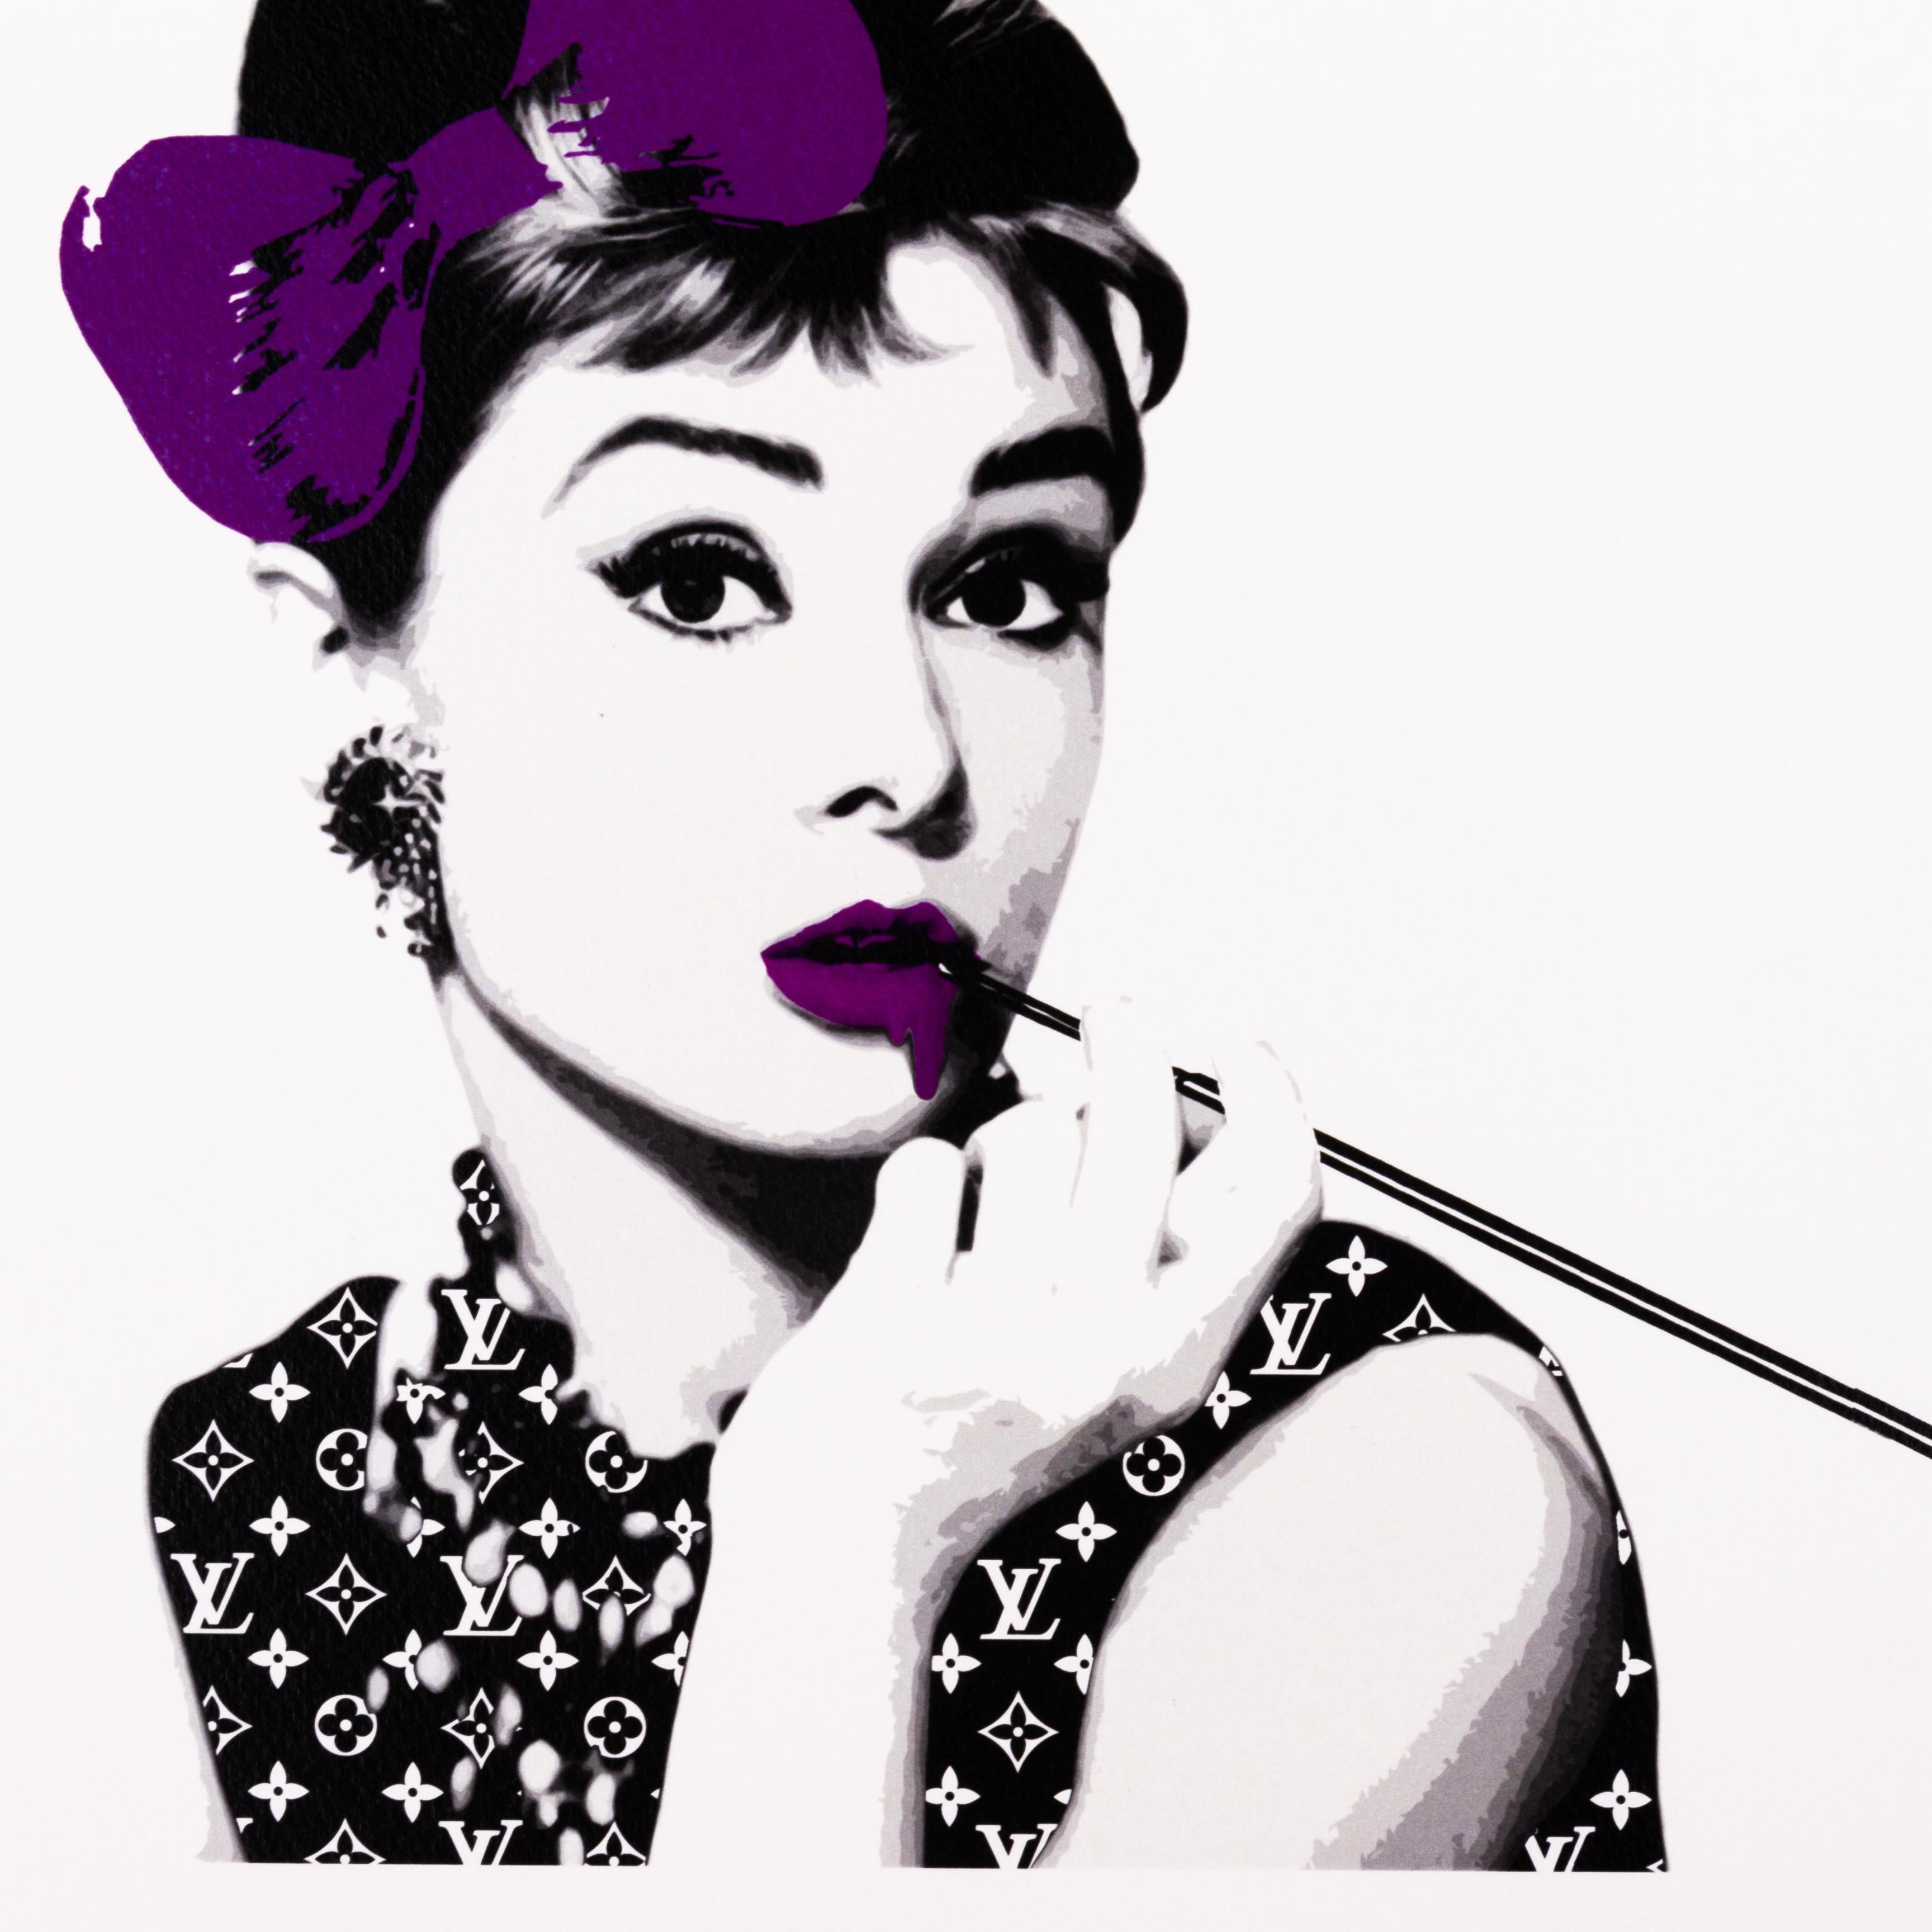 Death NYC Signed Pop Art Print Louis Vuitton Audrey Hepburn
From a private English collection
Free international shipping

